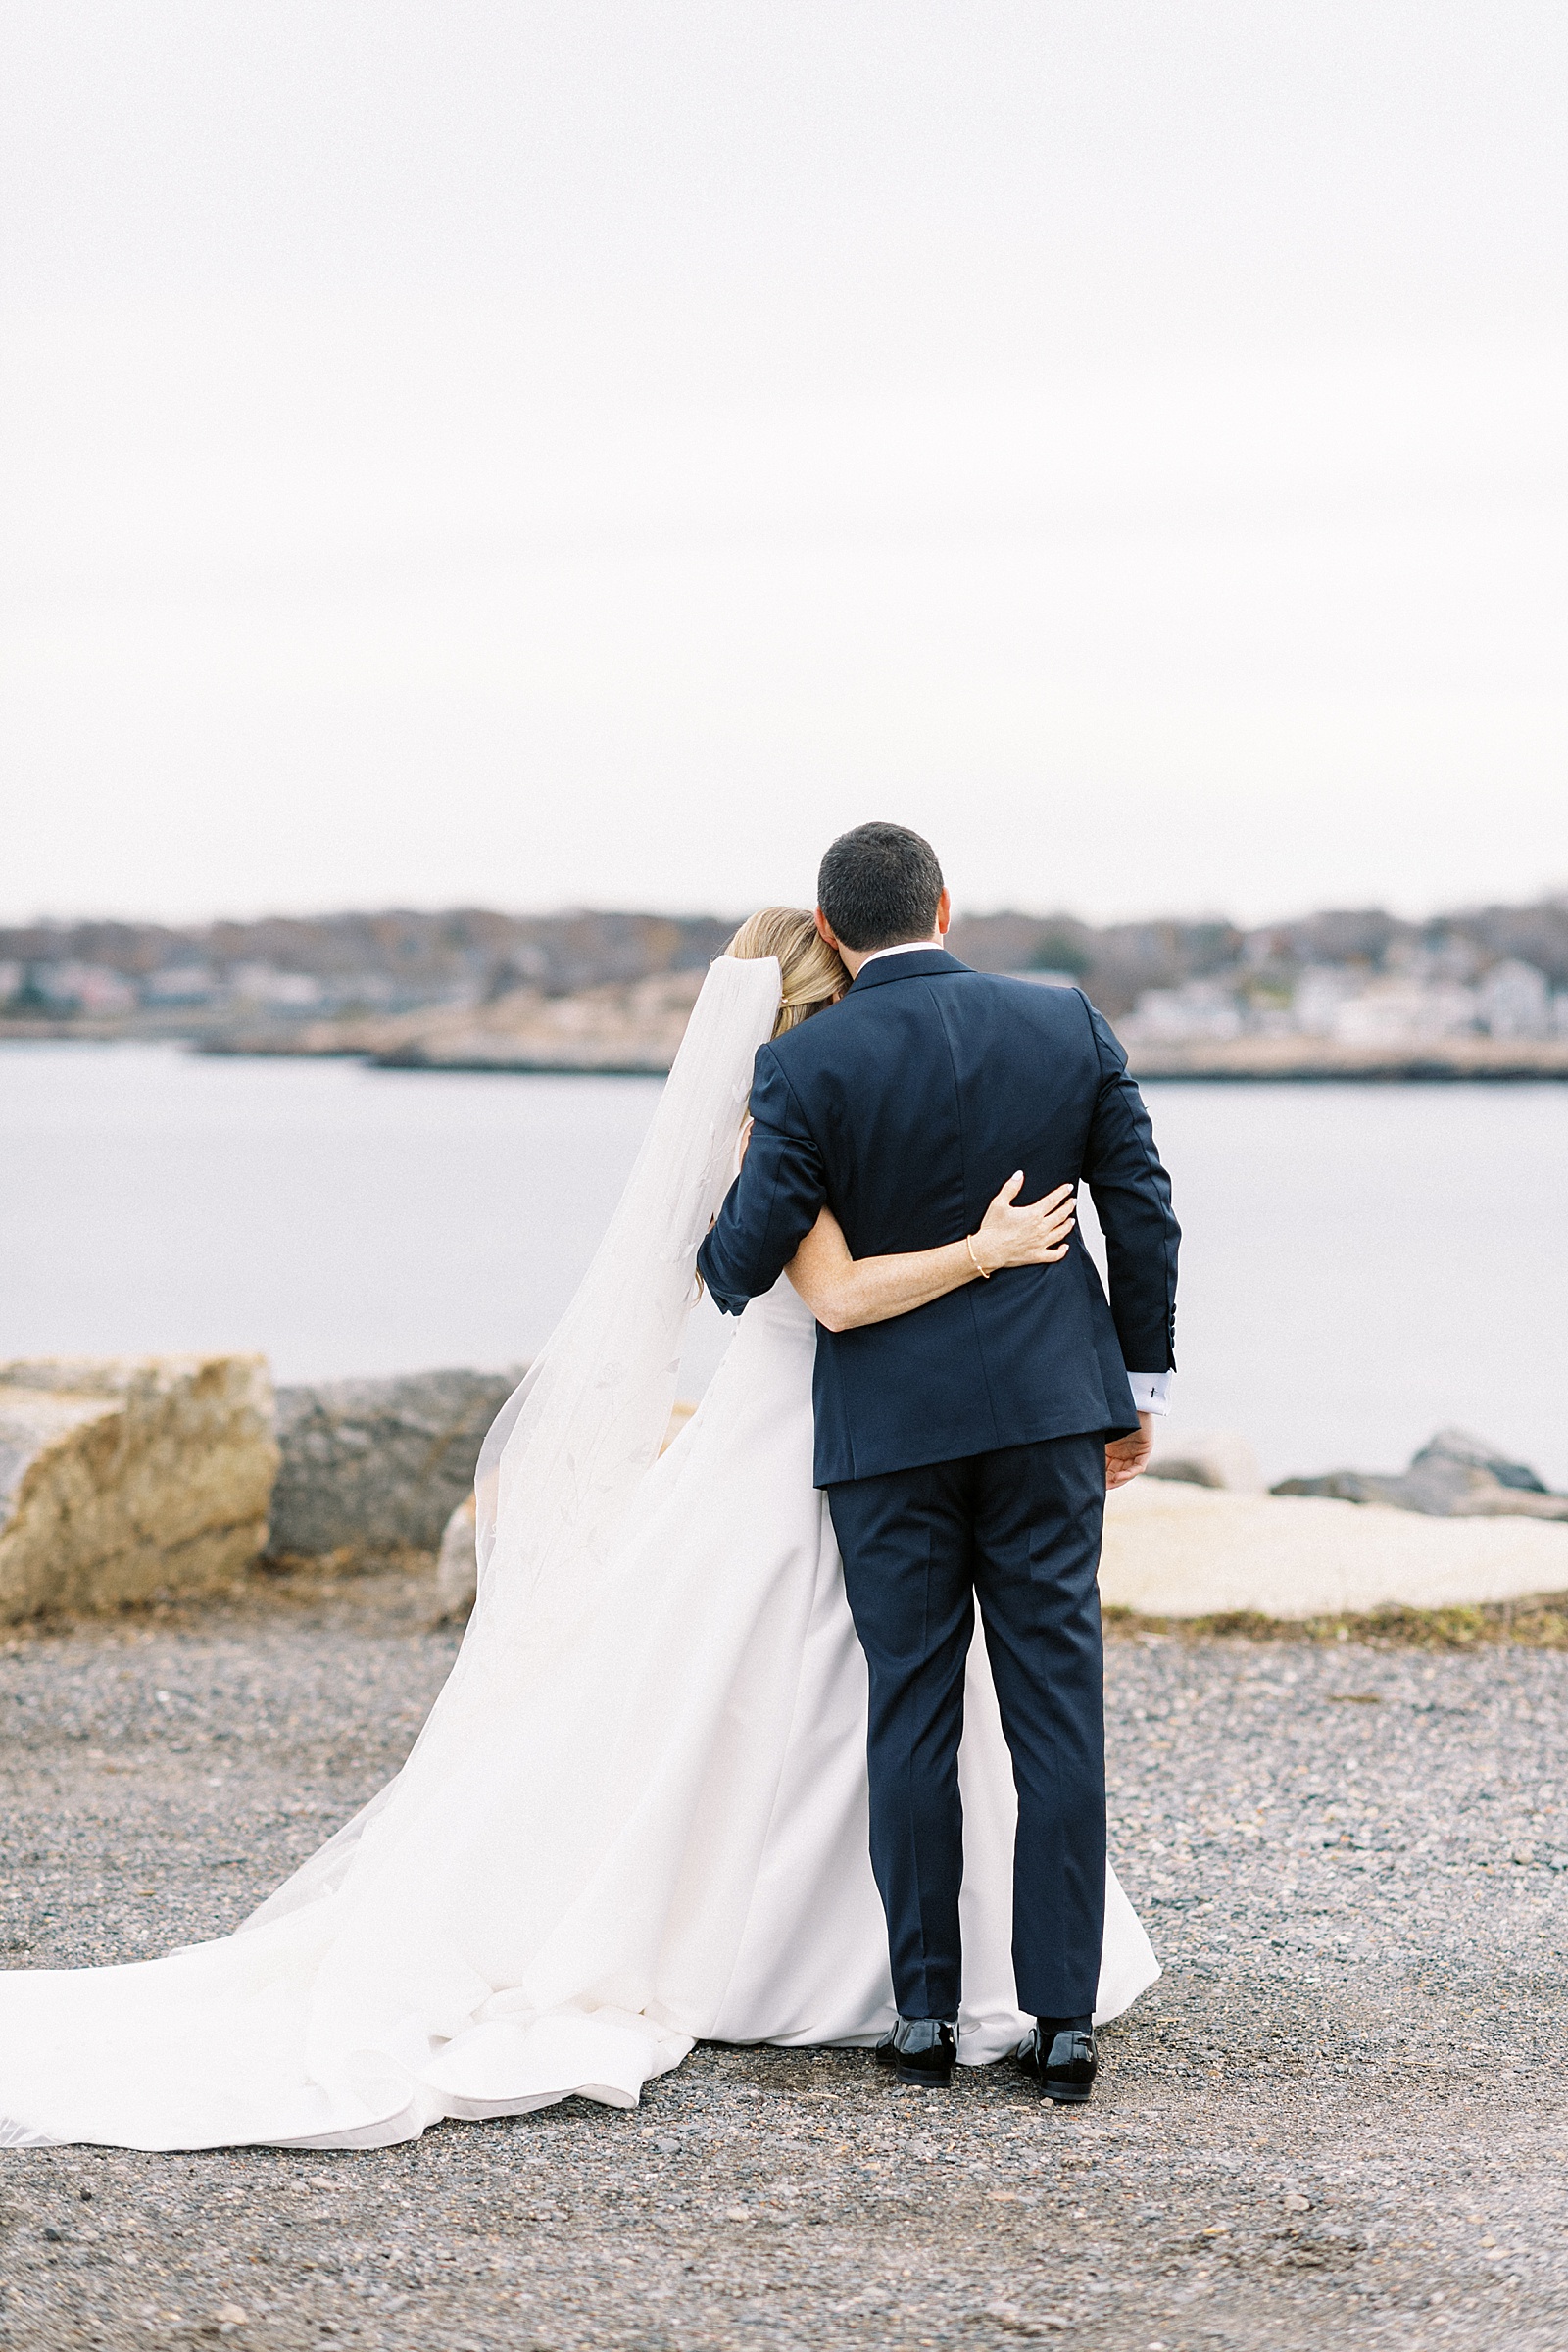 Bride and groom hugging and looking out over the water by New York photographer, Lynne Reznick.